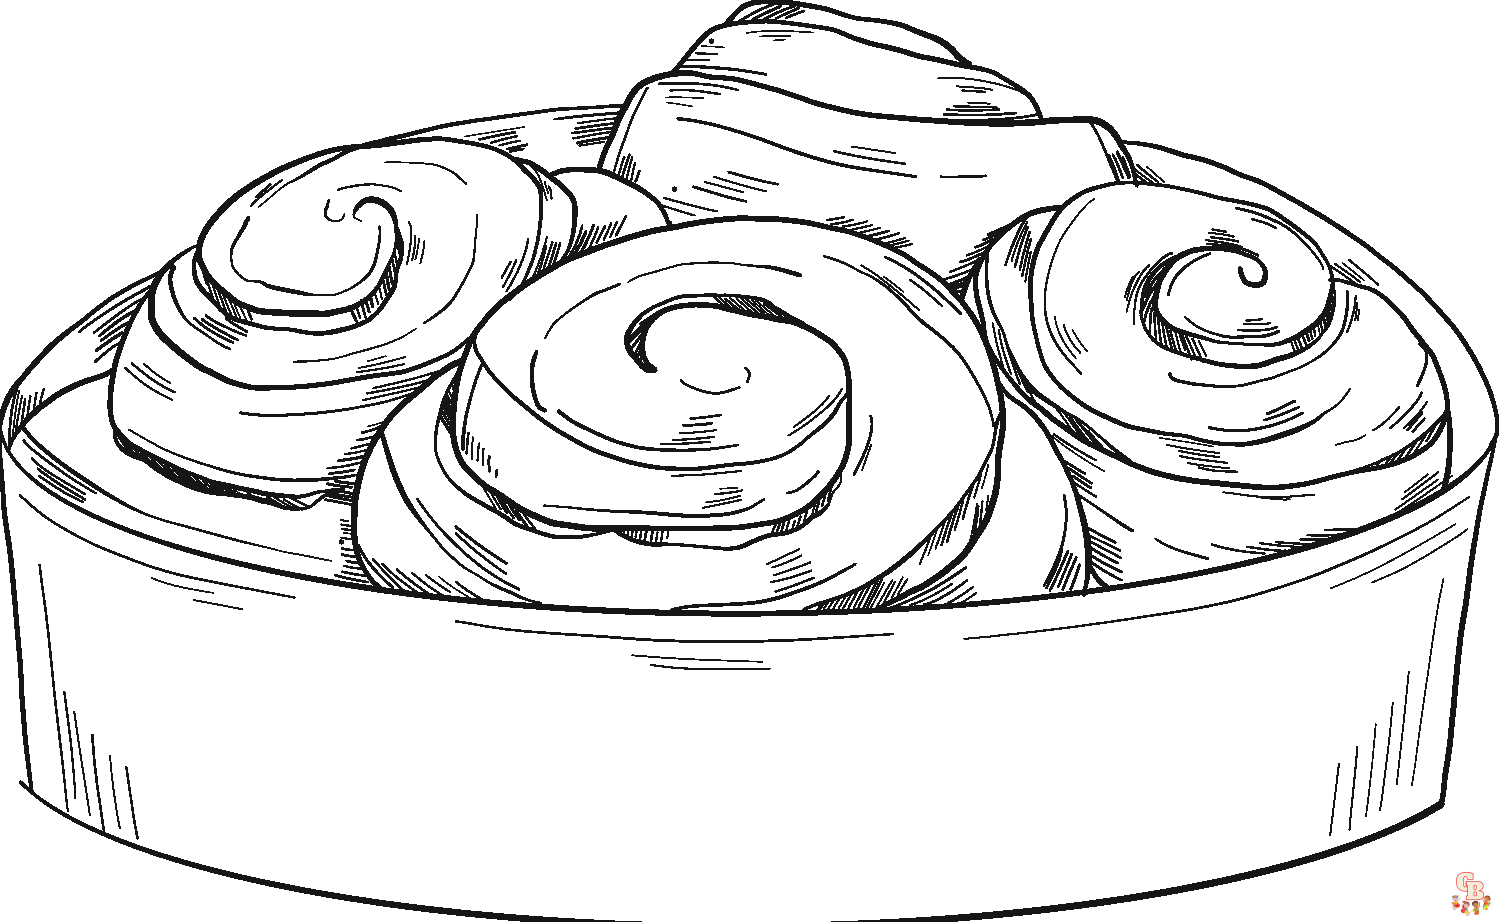 Cinnamon roll coloring pages printable